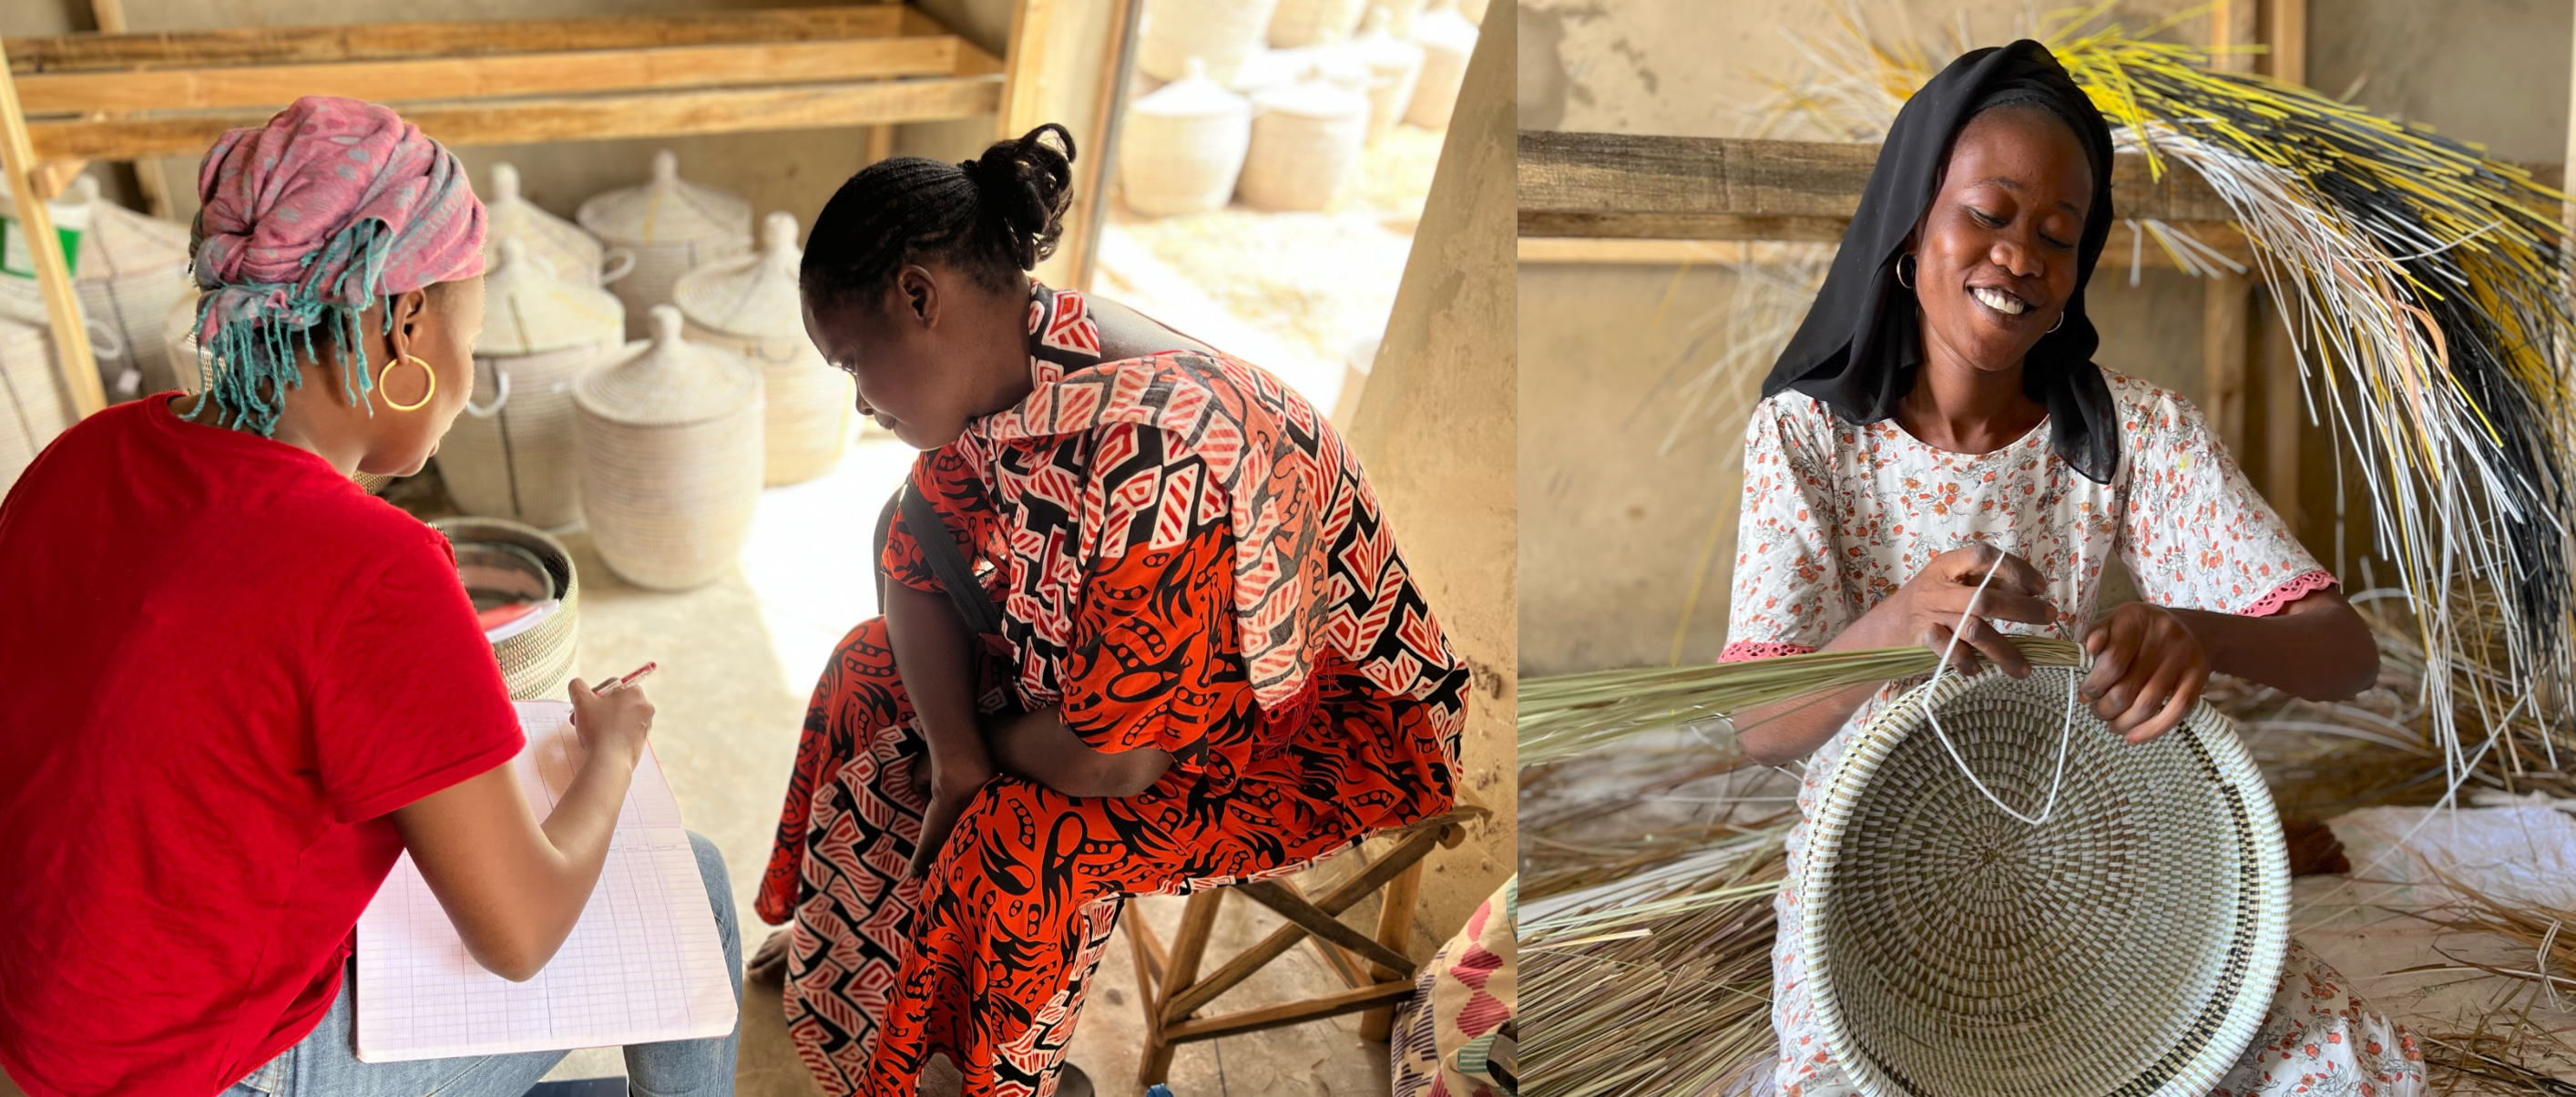 Fatou overseeing production, master weaver ND at work